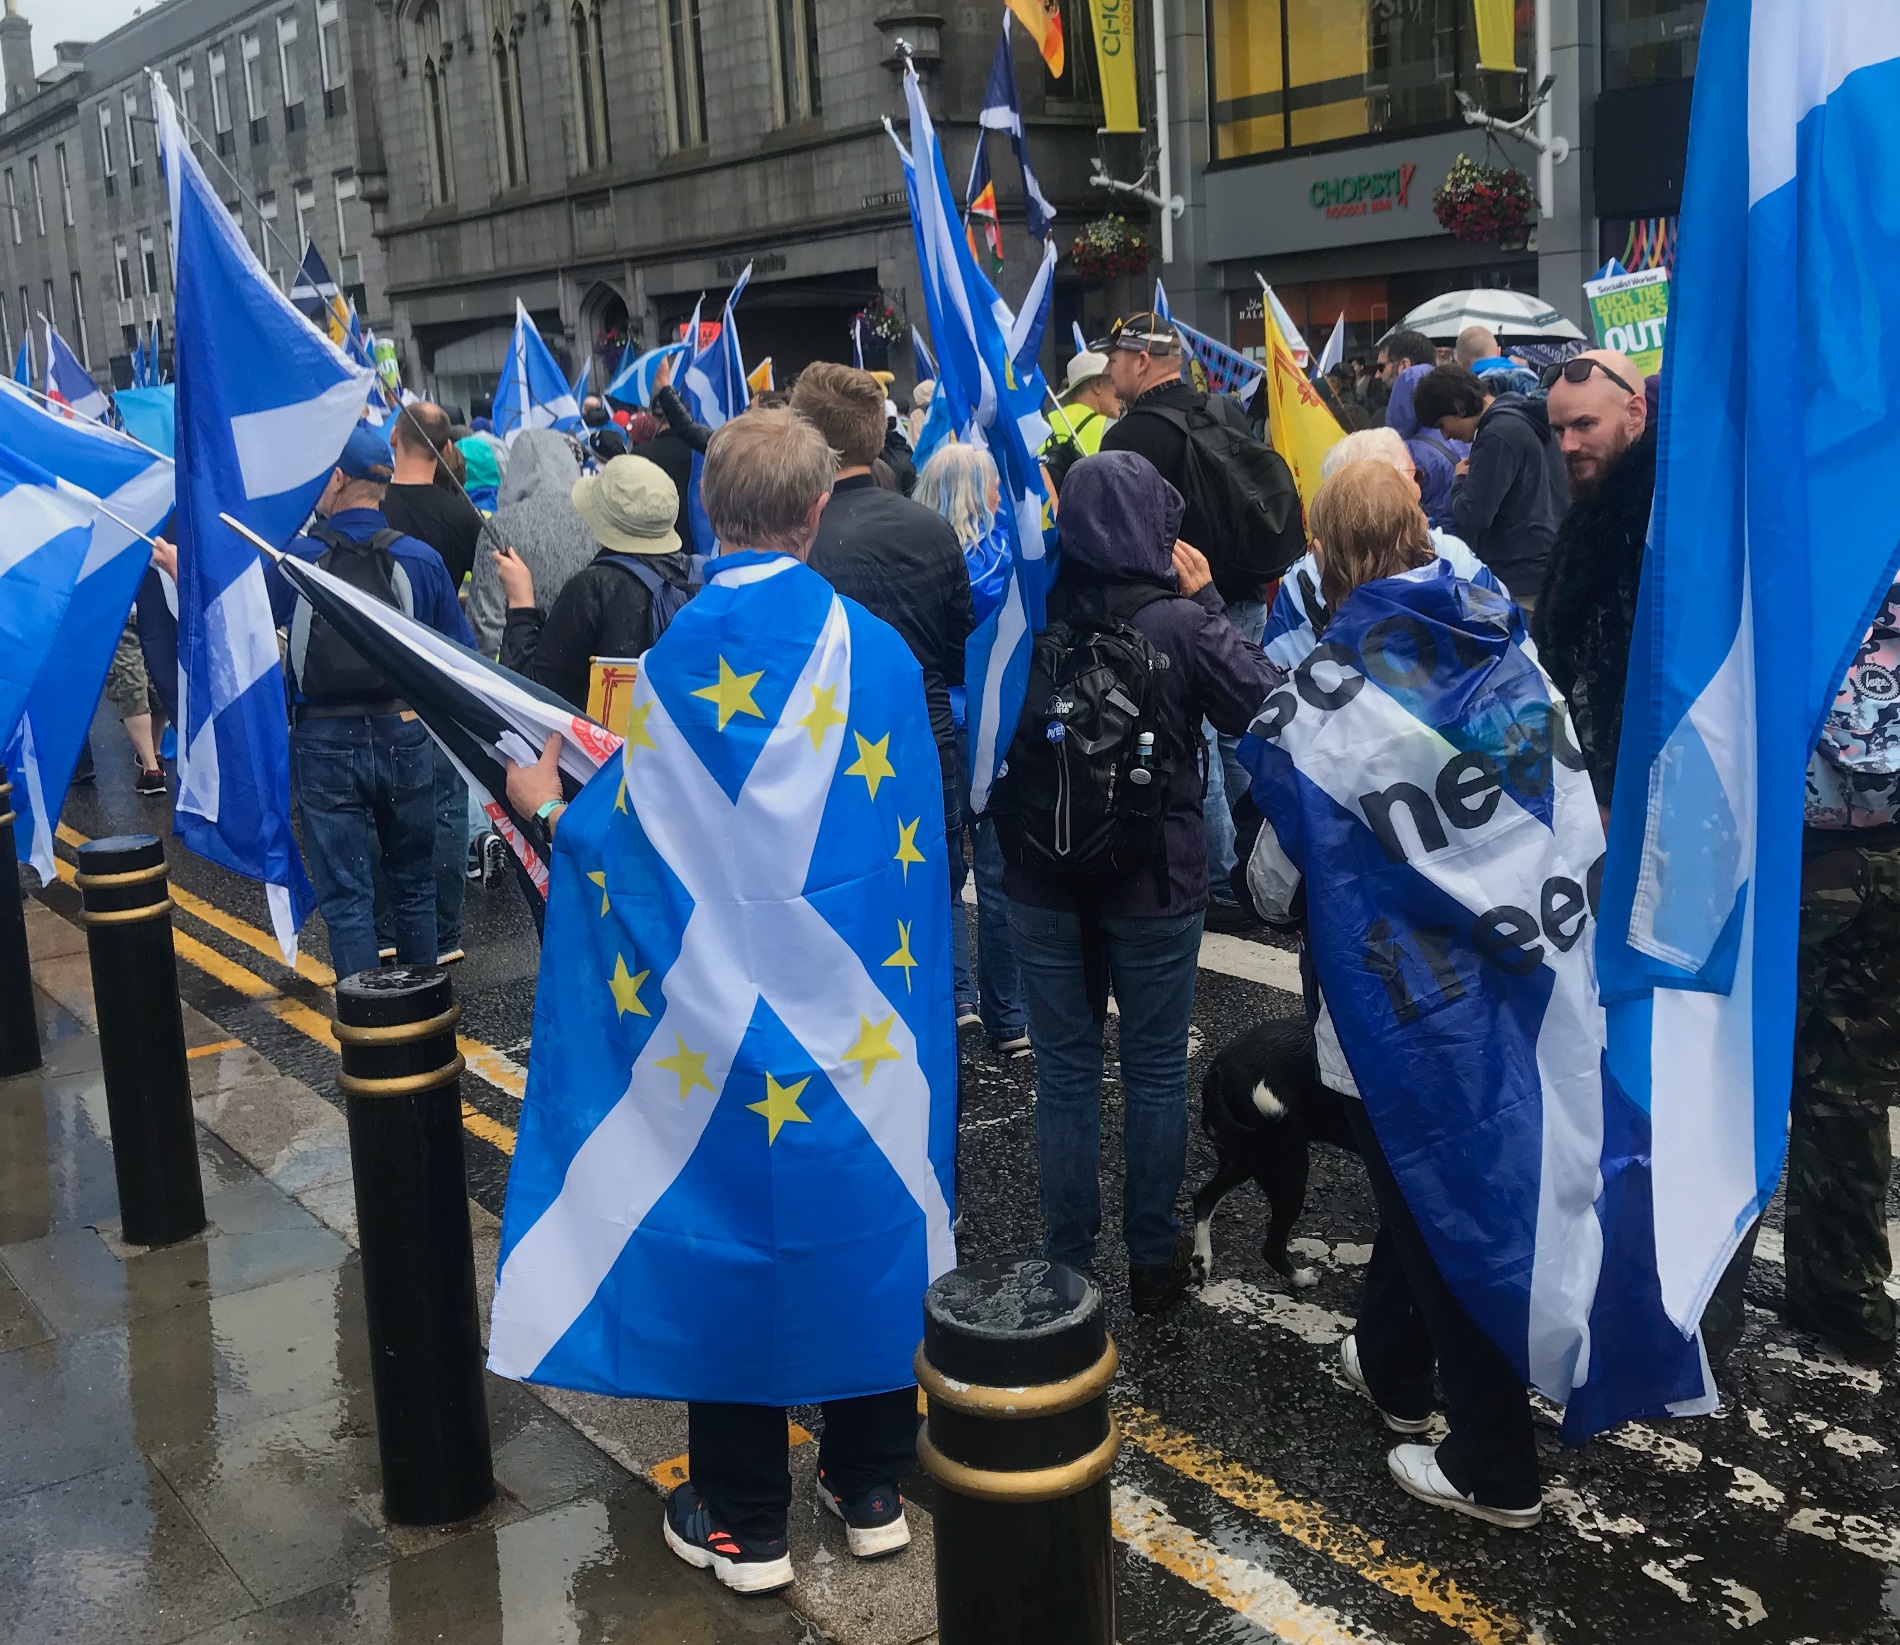 ‘Hey Europe, Scotland Has a Message for You!’: Scottish Independence and the Value of Values